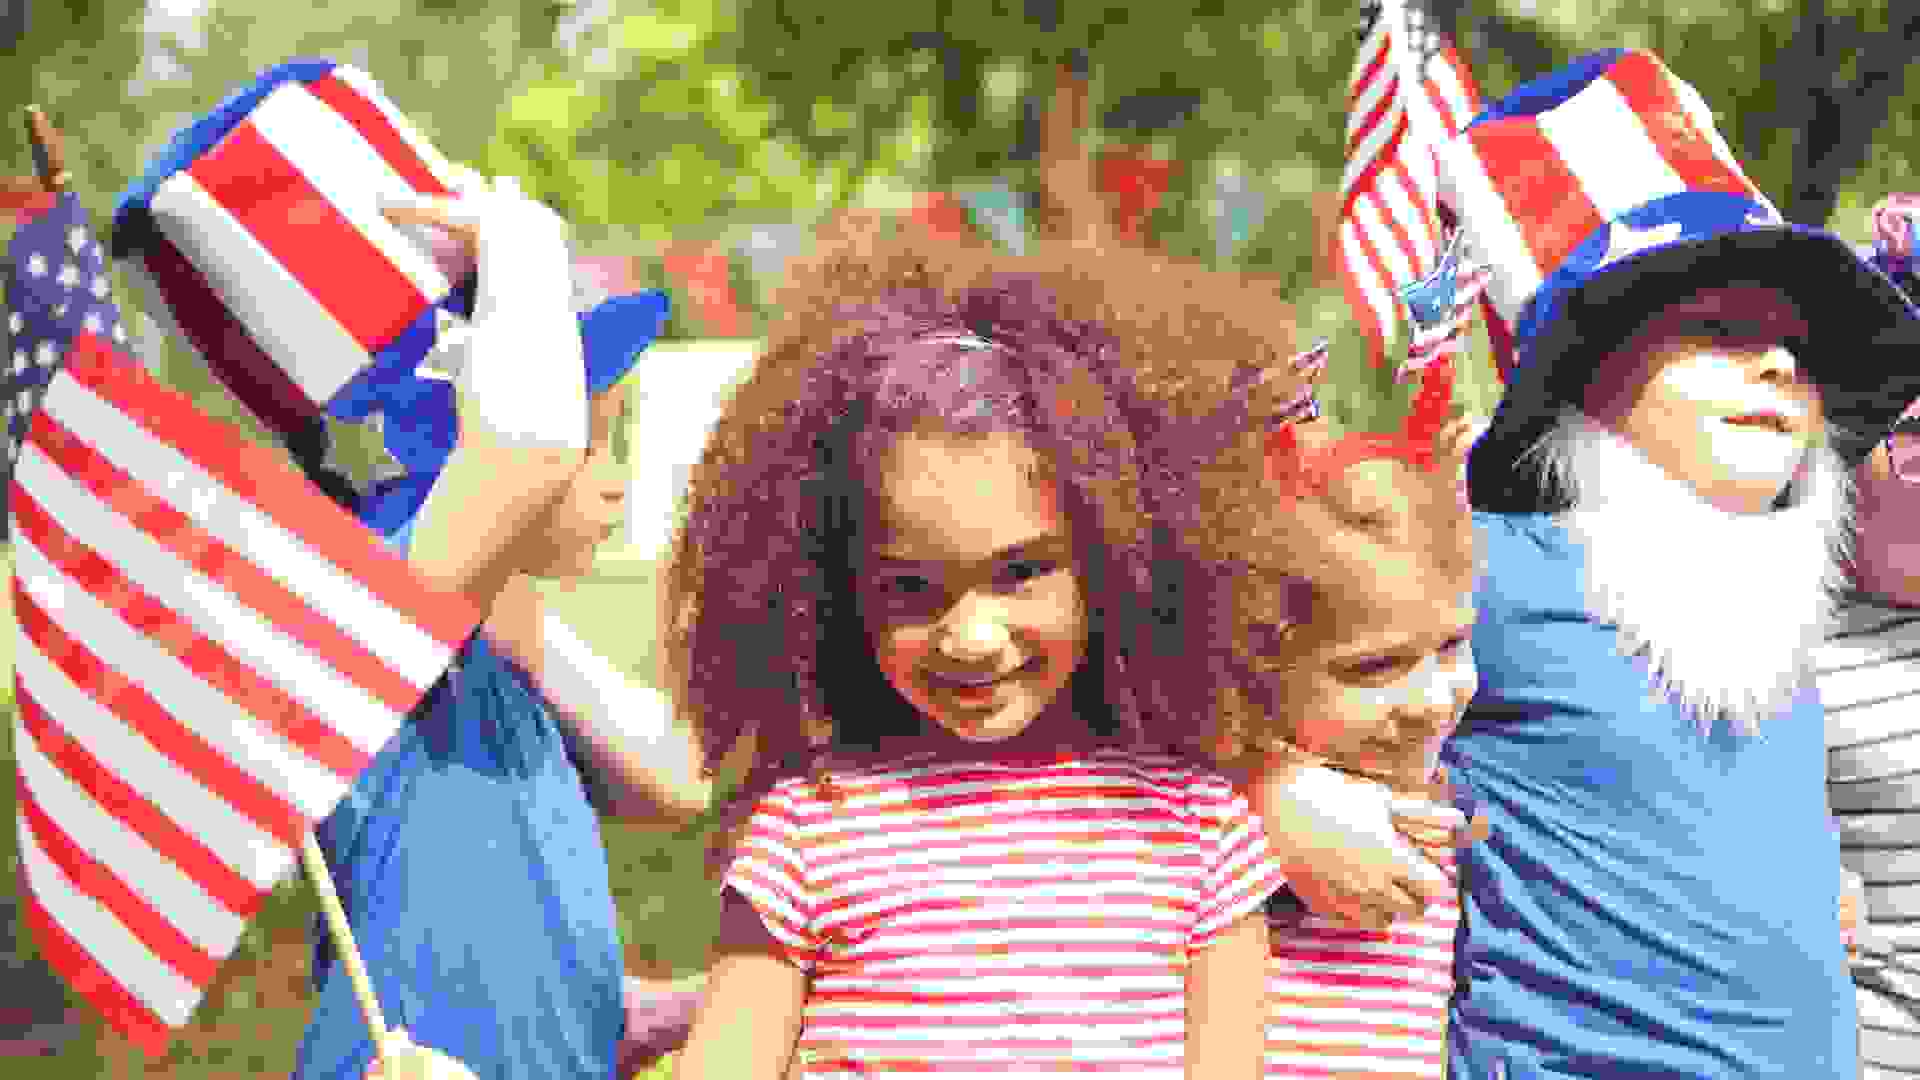 Children on Fourth of July or Memorial Day.